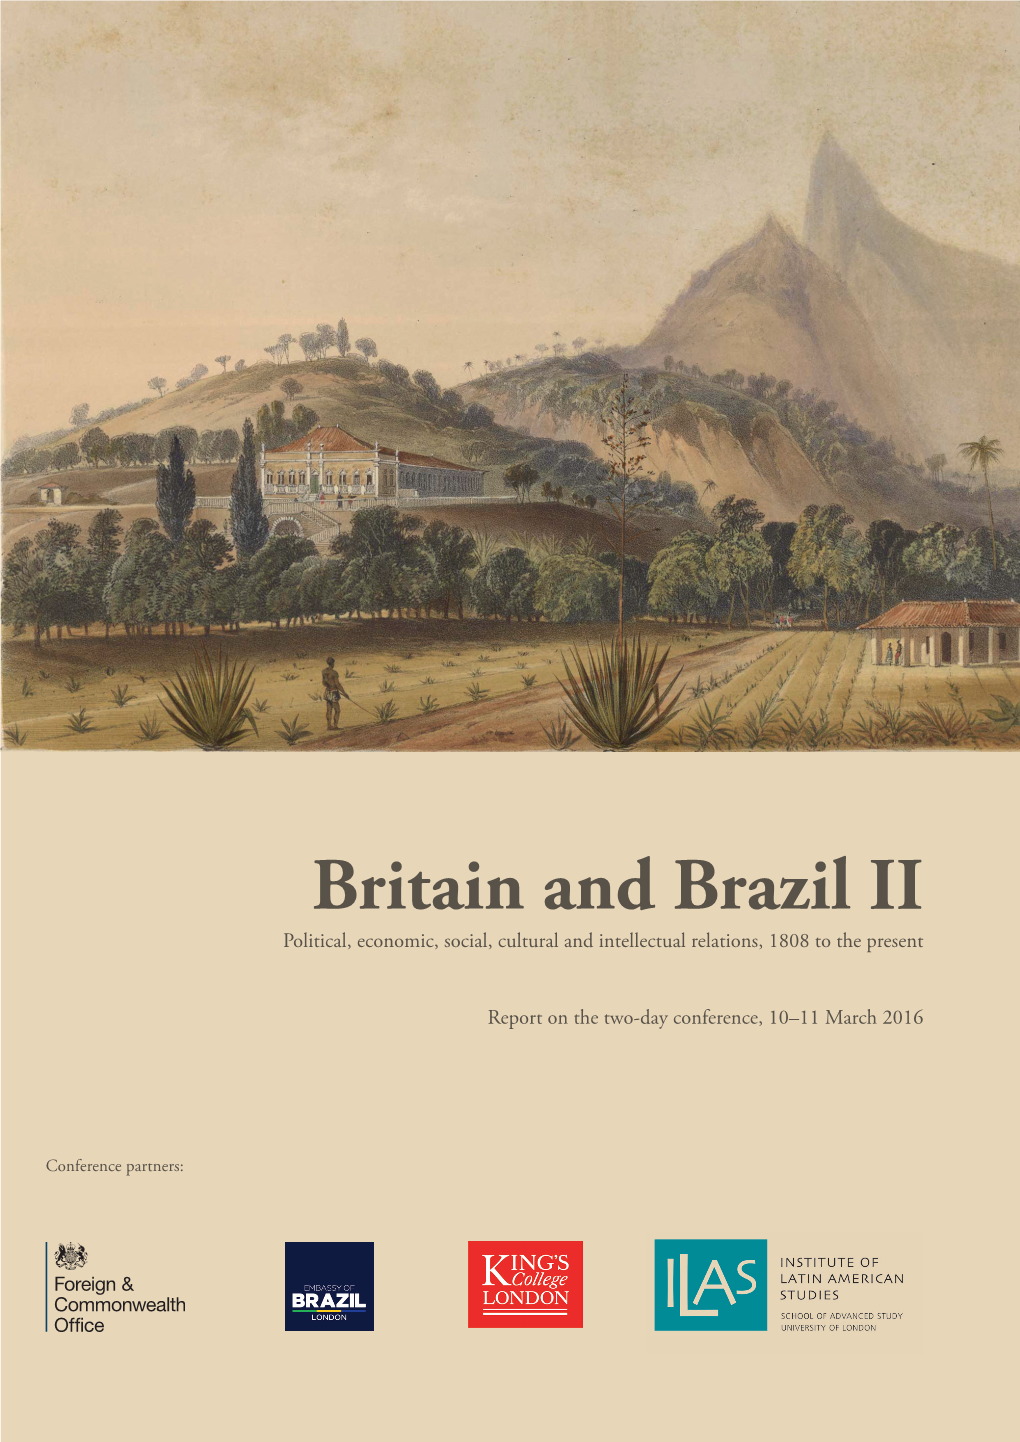 Britain and Brazil II Political, Economic, Social, Cultural and Intellectual Relations, 1808 to the Present